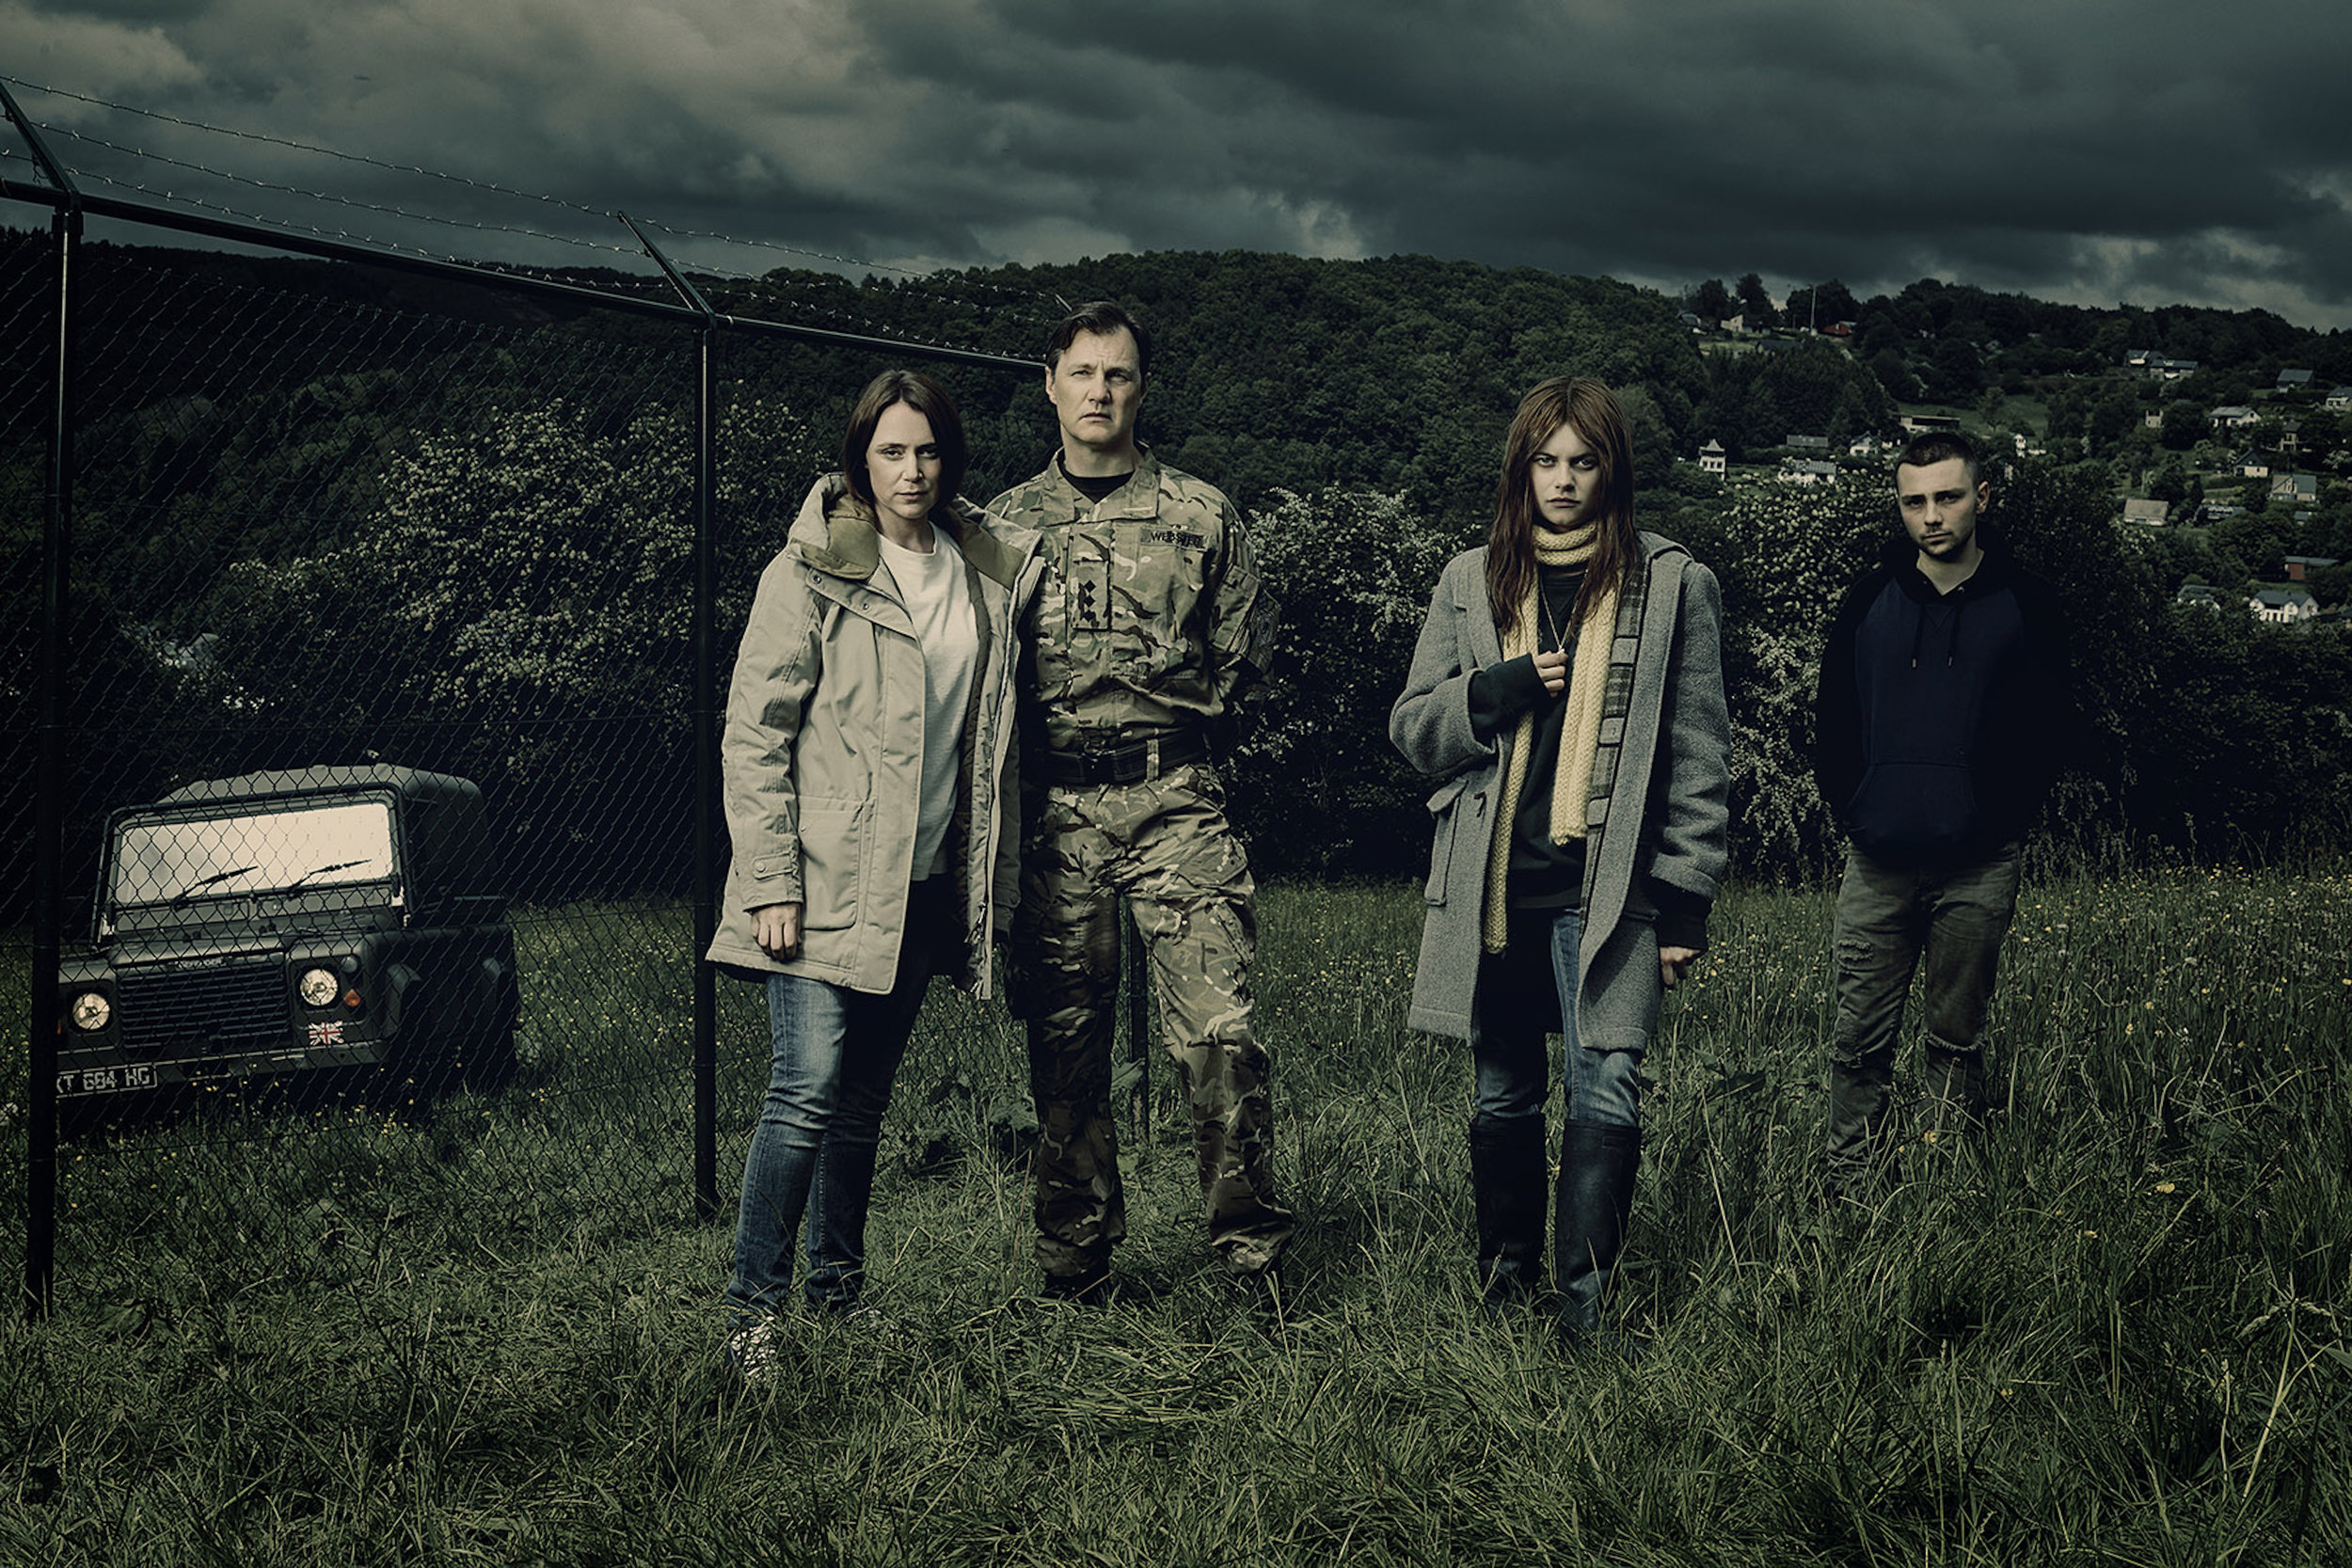   THE MISSING  ”The most gripping show on television”  The Guardian  